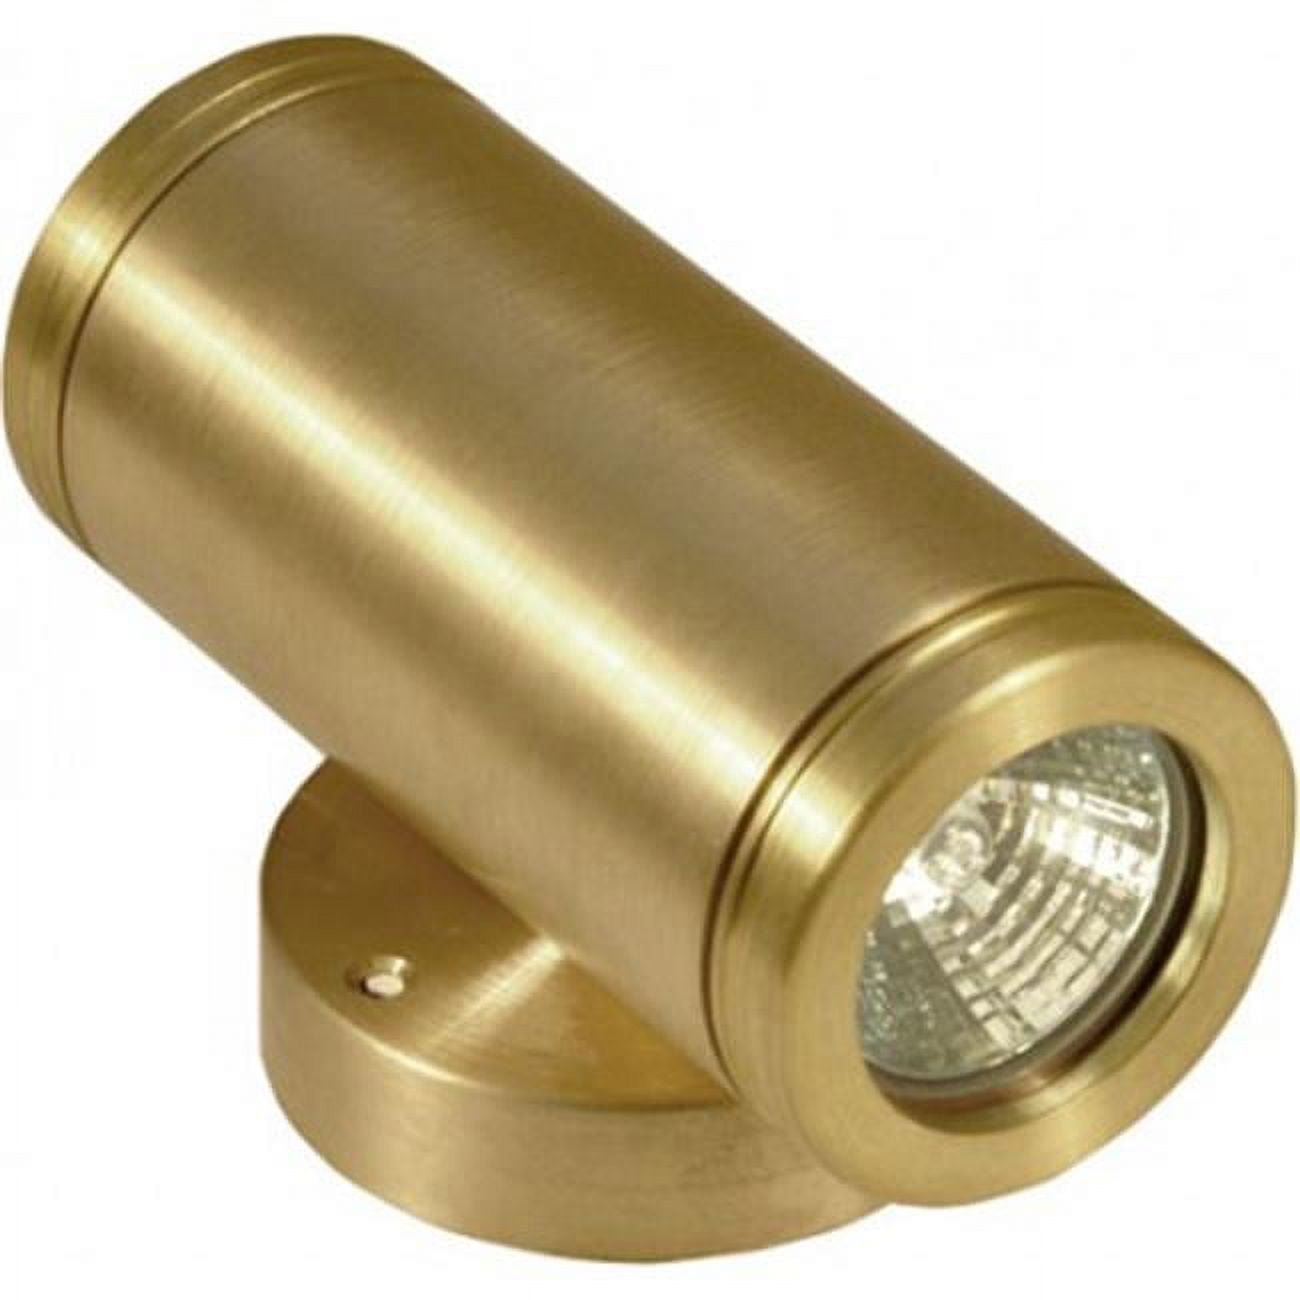 Picture of Dabmar Lighting LV65-LED3-BS 2 x 3W & 12V MR16 LED Solid Brass Up & Down Wall Light Fixture